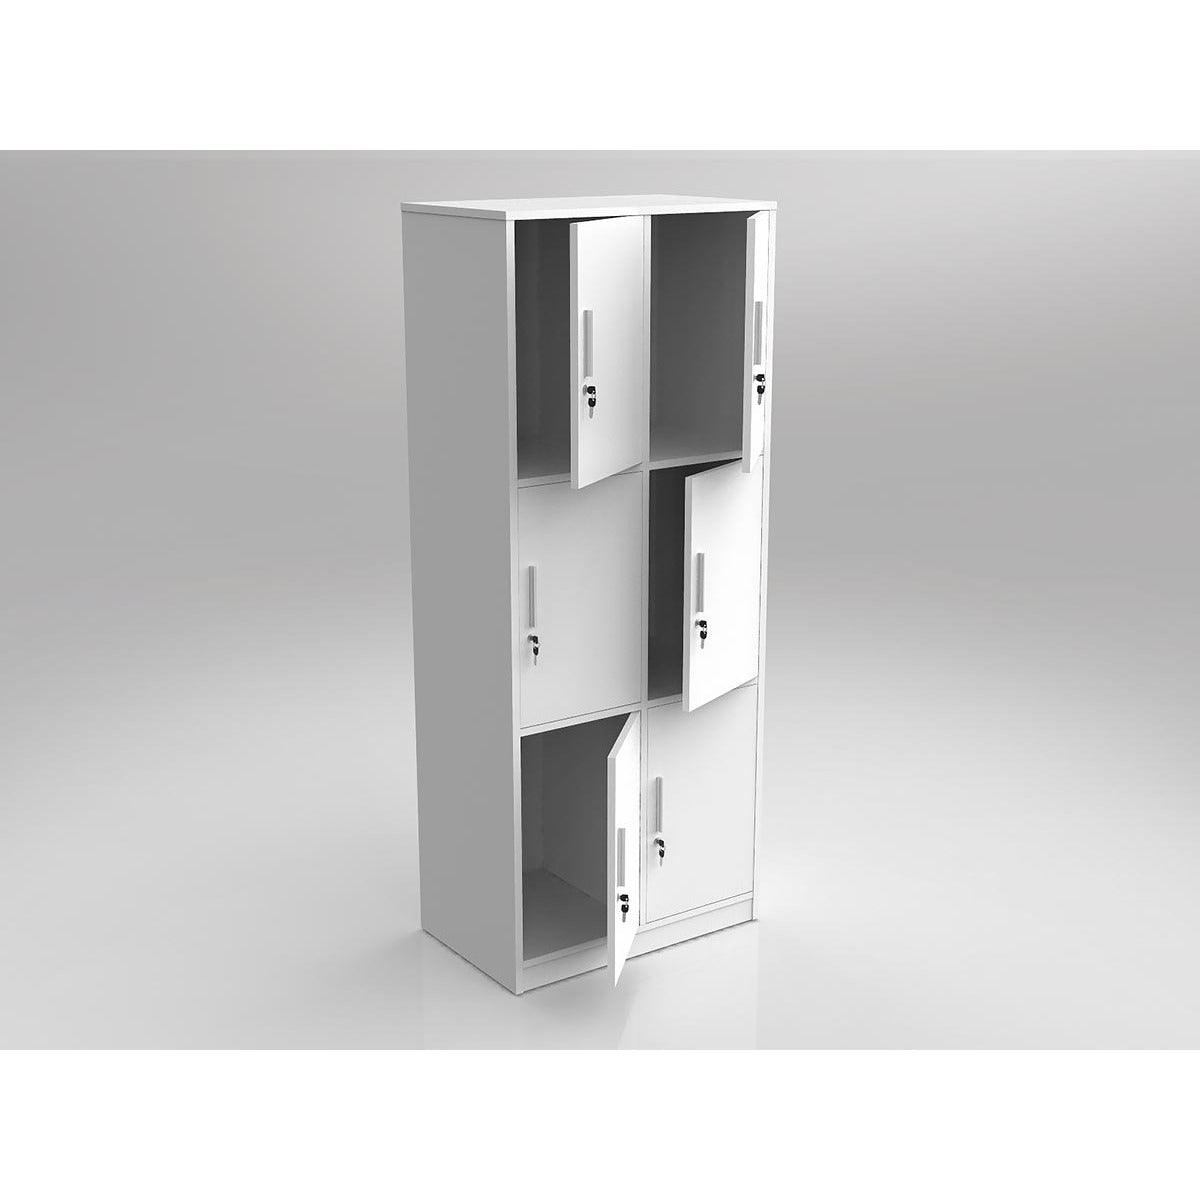 Axis Double Locker - Office Furniture Company 